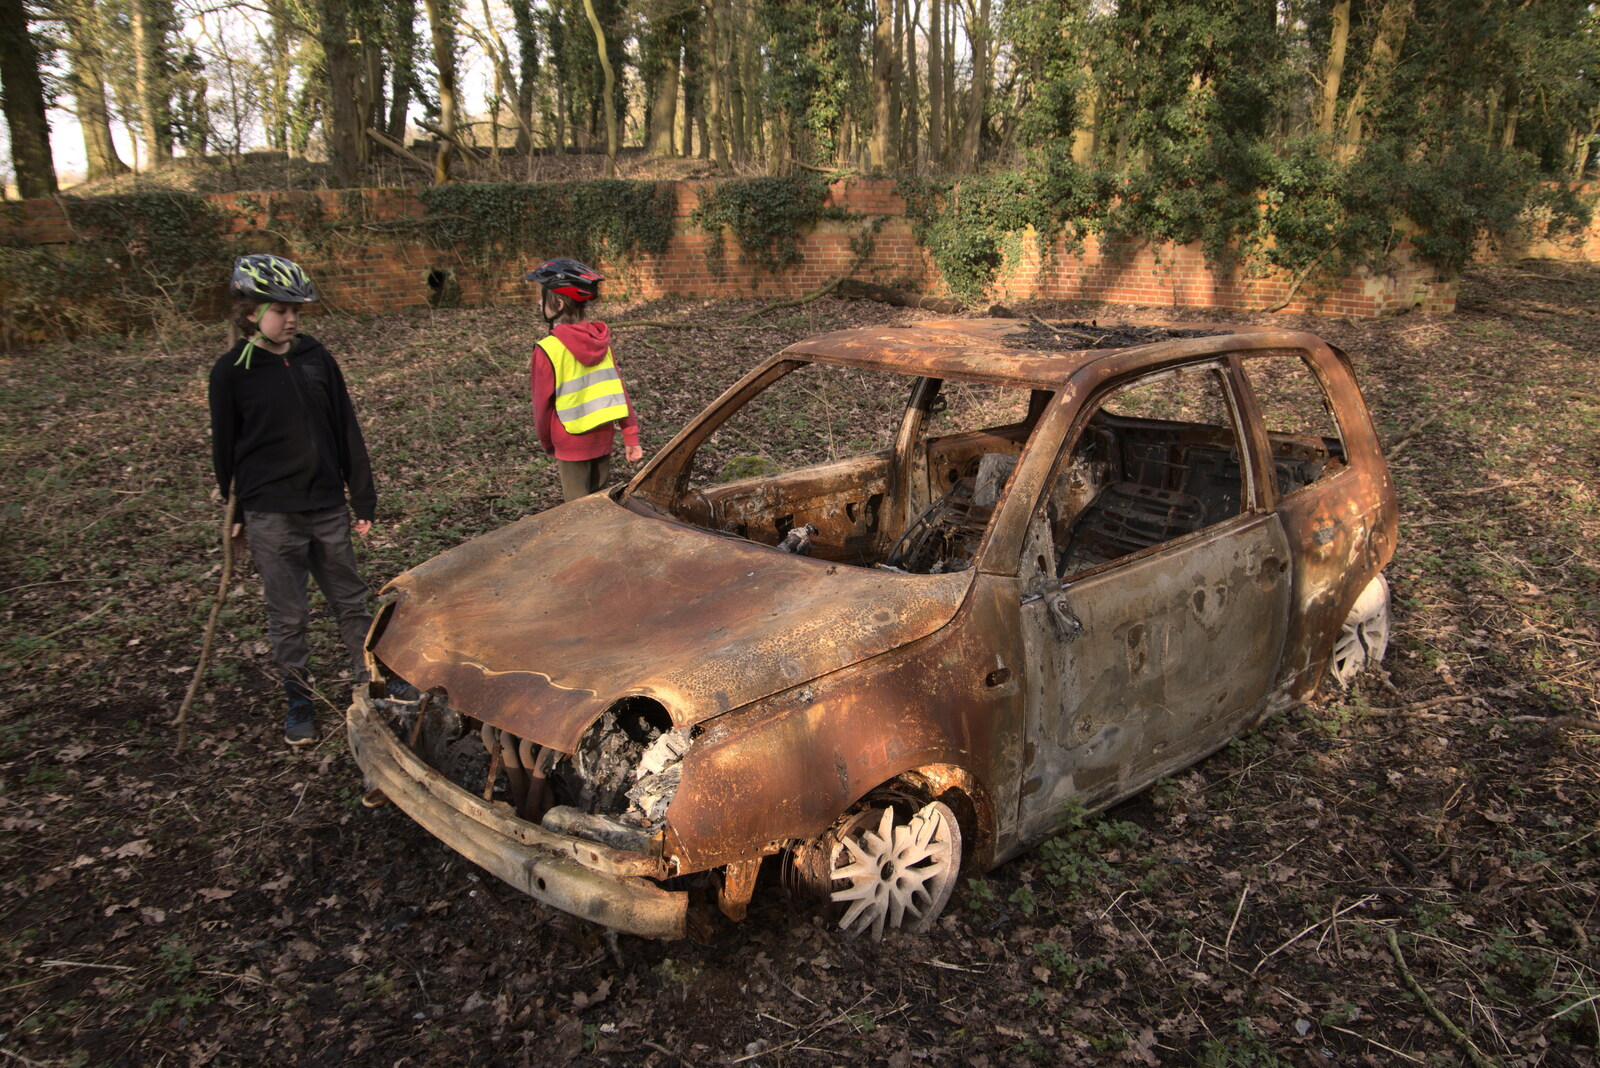 The boys inspect the derelict car from Fred's New Bike and an A140 Closure, Brome, Suffolk - 27th February 2021